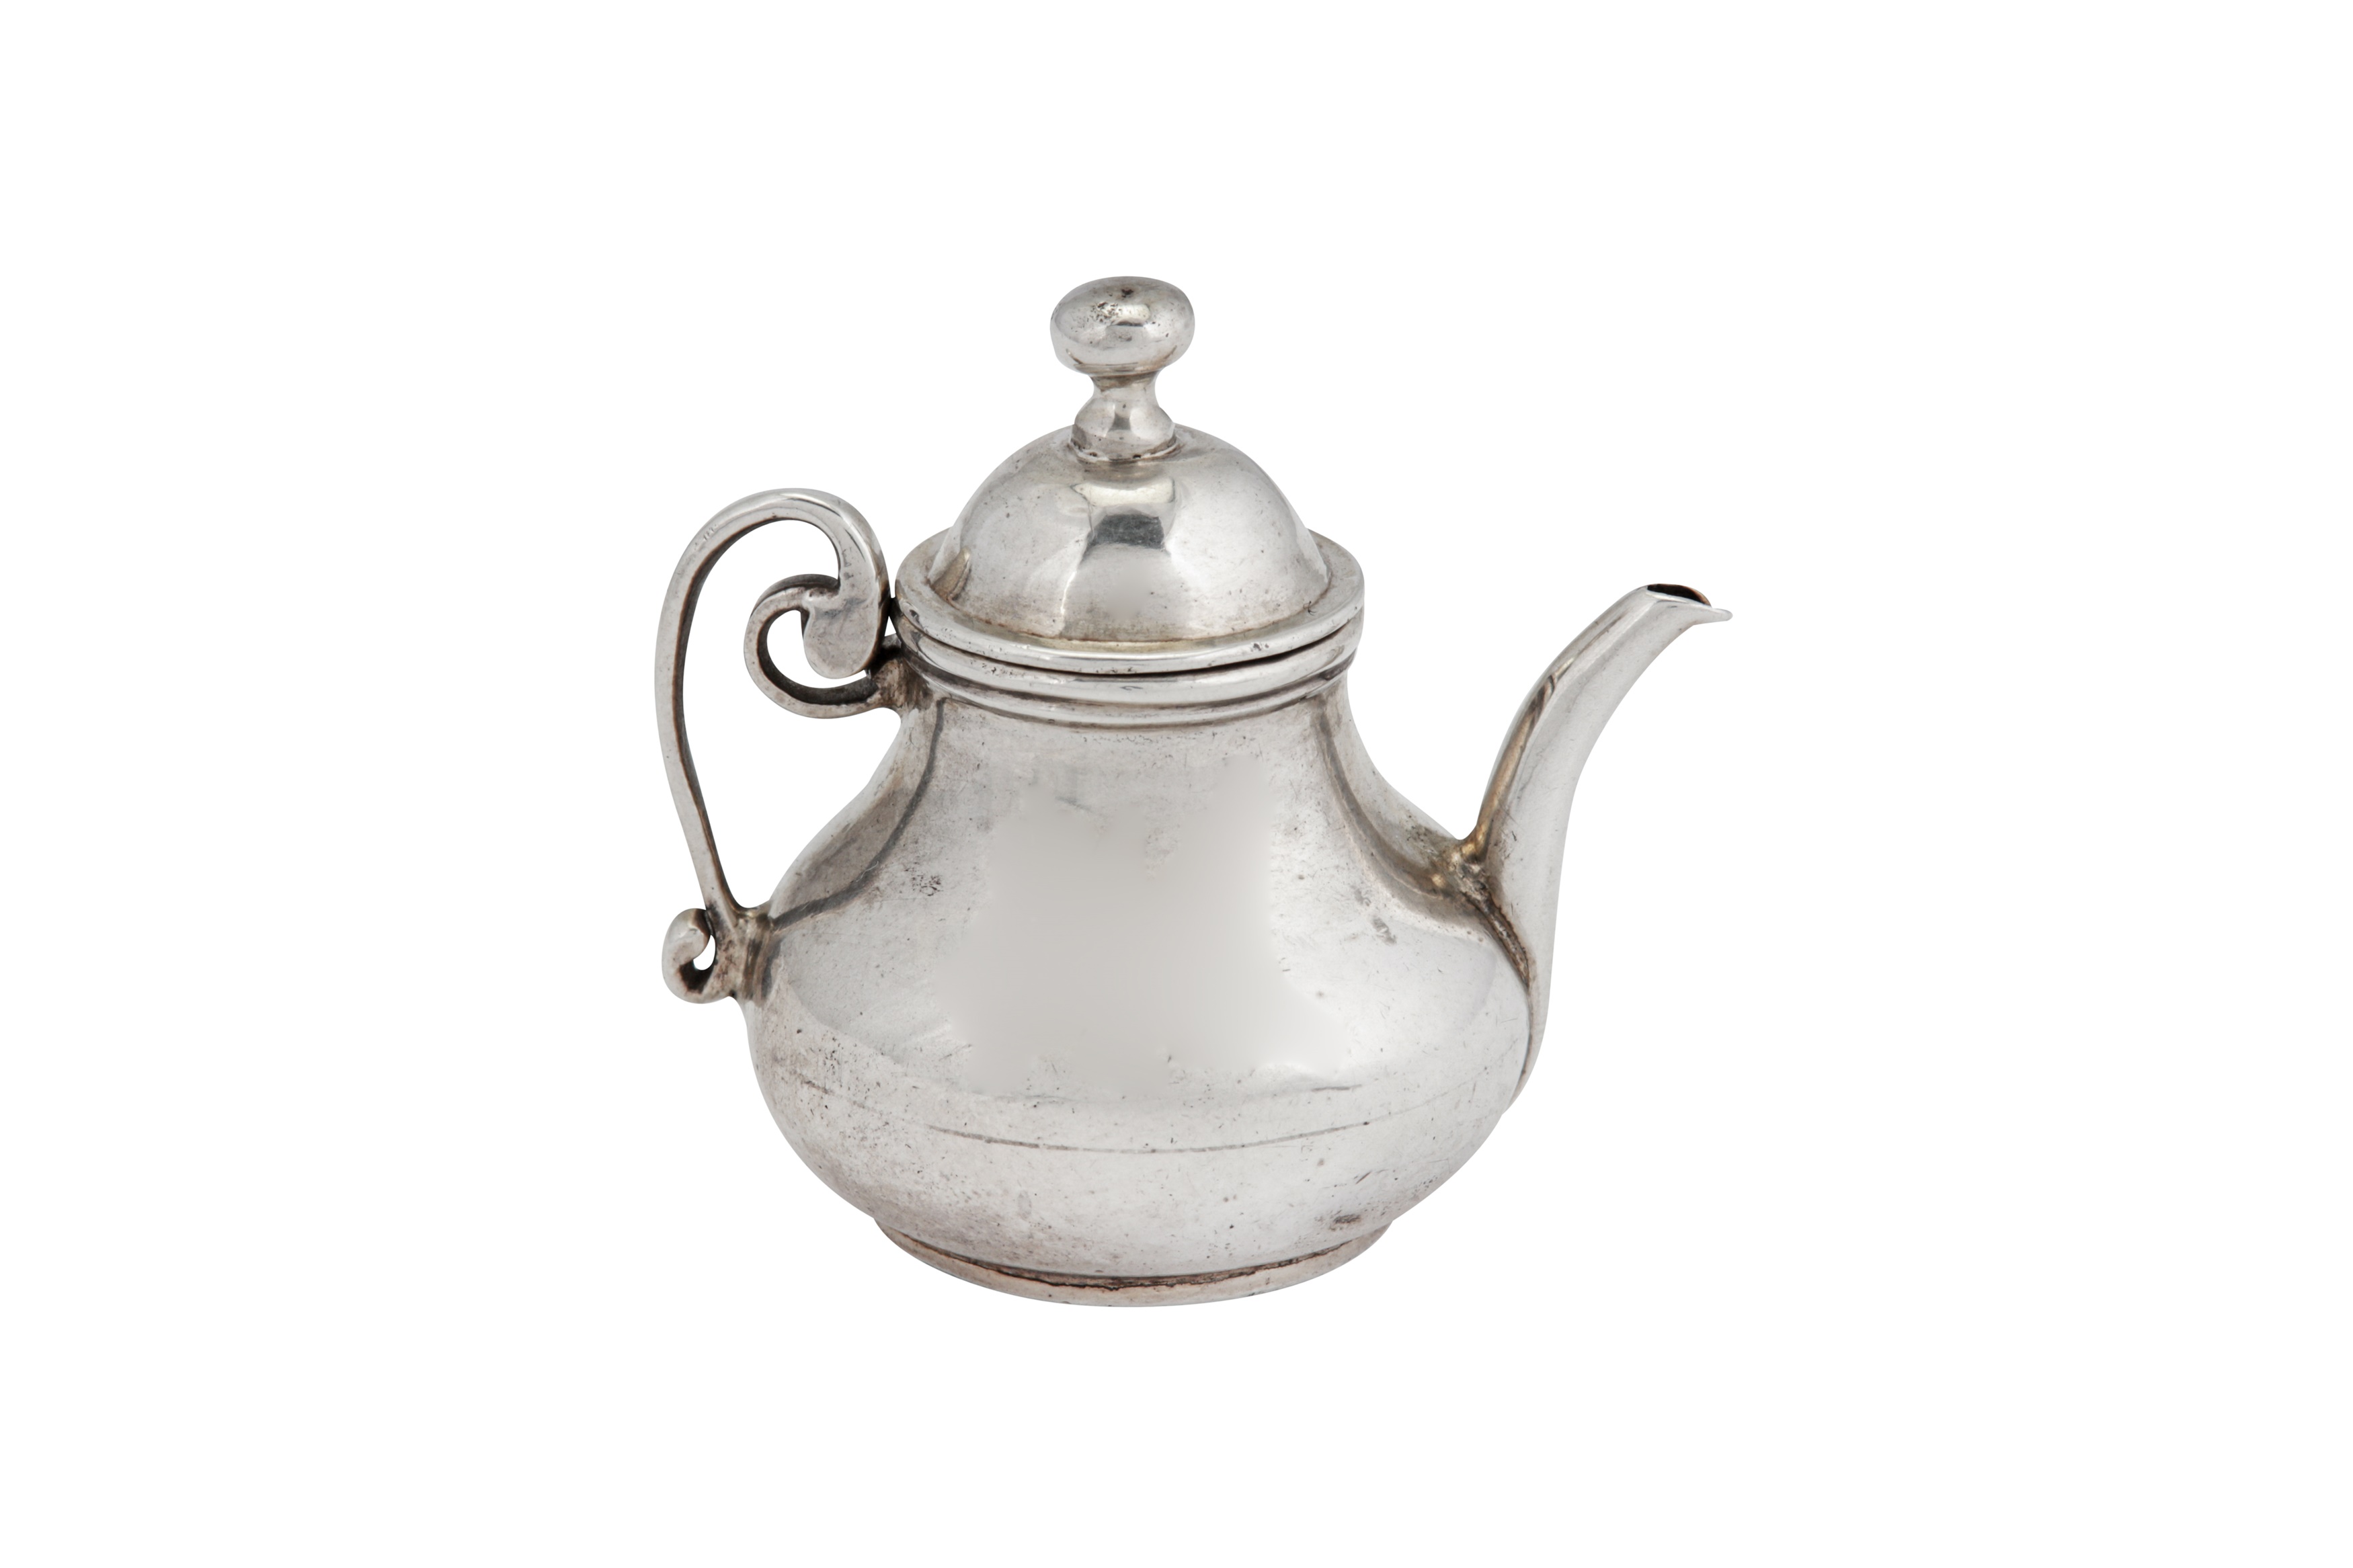 An early 18th century Dutch silver miniature ‘toy’ teapot, Amsterdam 1738 by Willem van Strant - Image 2 of 2